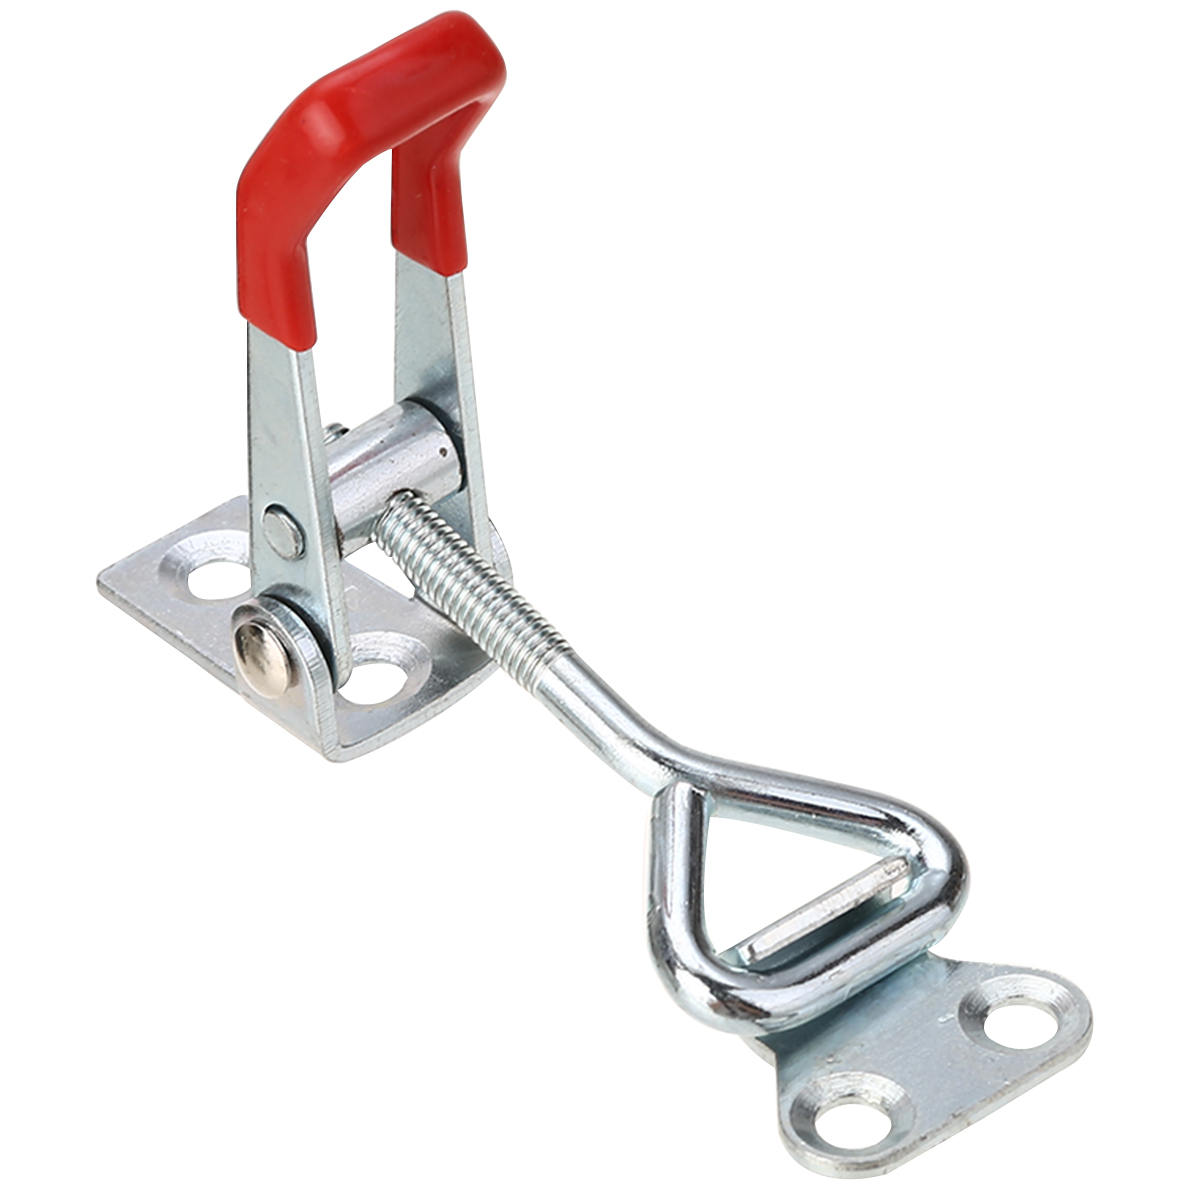 2Pcs Toggle Catch Toggle Clamp Adjustable Furniture Hardware Hasps Locks For Cabinet Boxes Lever Handle